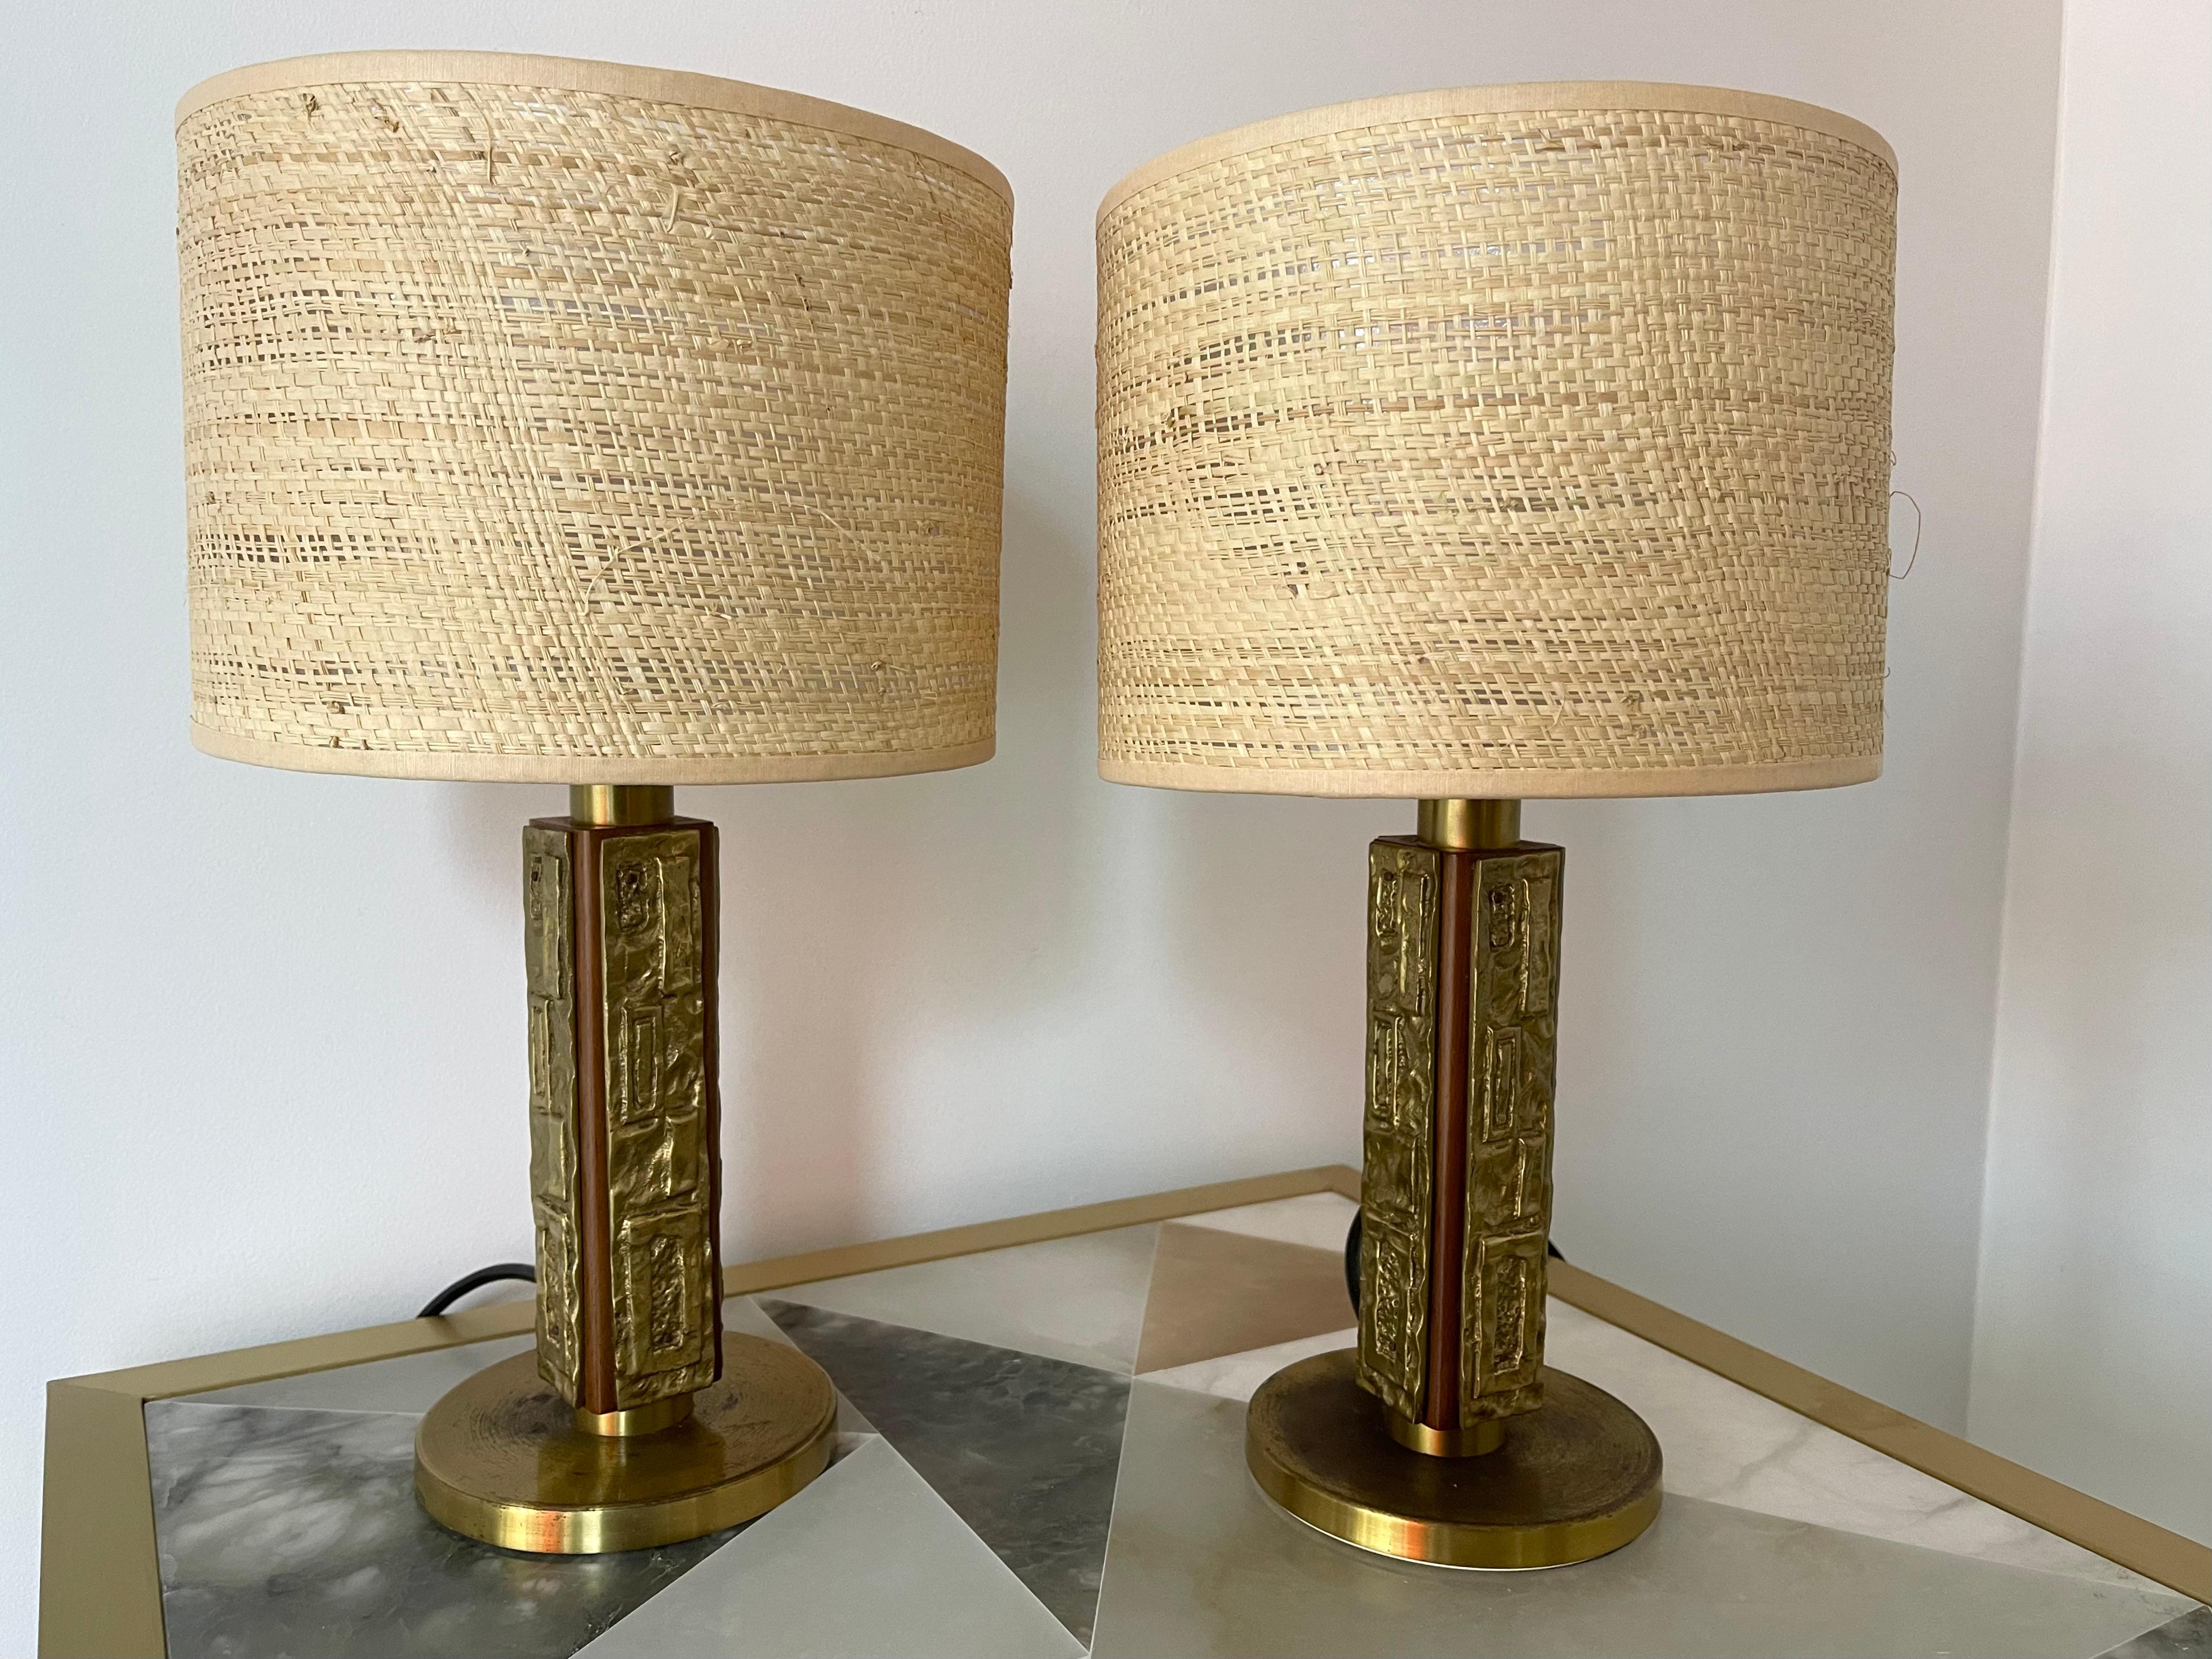 Pair of Brass and Wood Sculpture Lamps by Angelo Brotto for Esperia Italy, 1970s For Sale 2